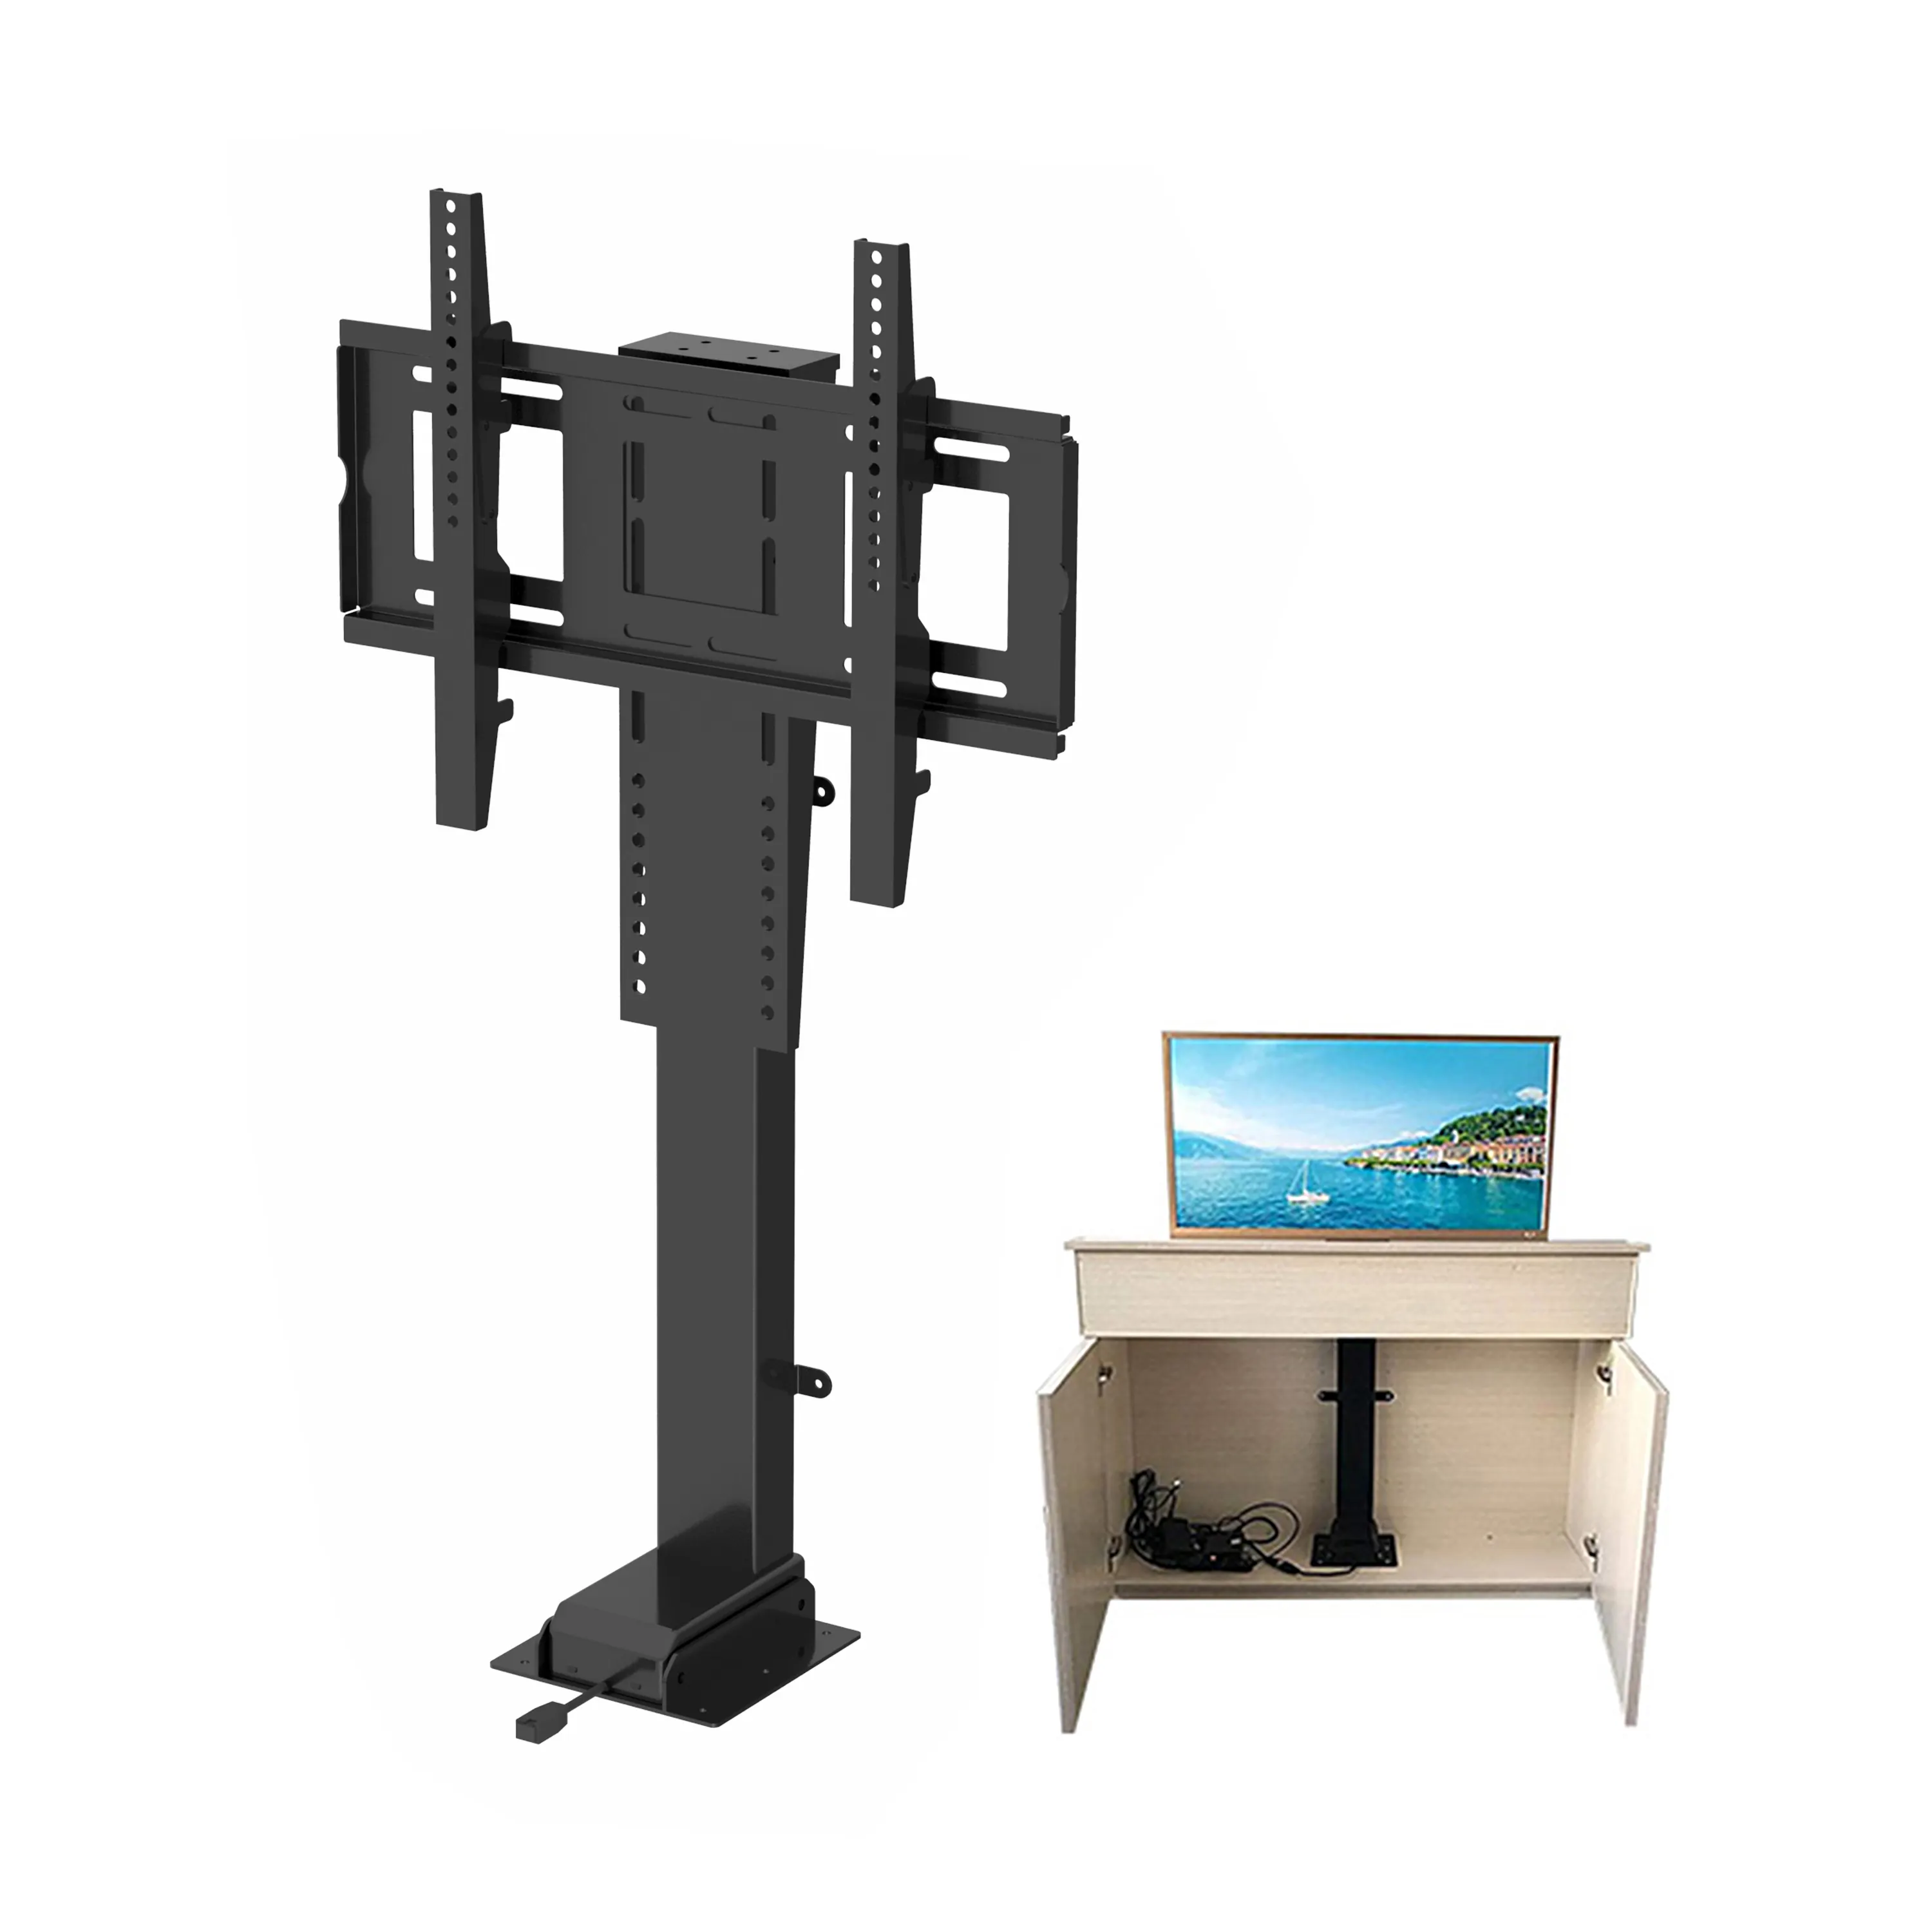 Living Room Hall Furniture I Shaped Unit Lift Lcd Tv Cabinet Modern for Wooden Antique Designs